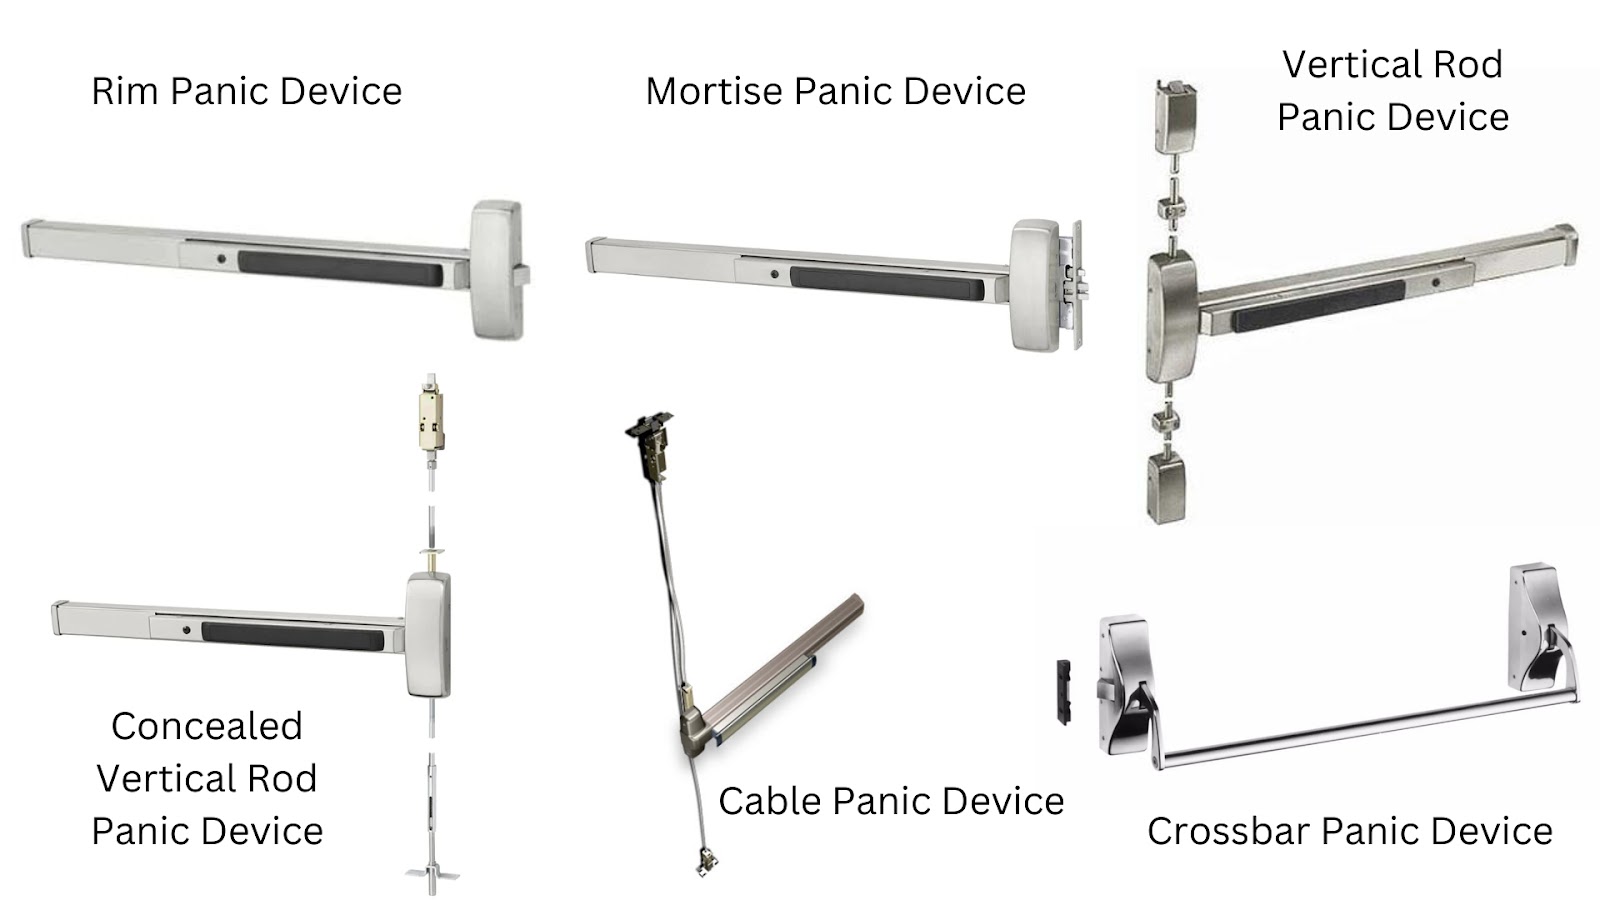 Different types of panic hardware